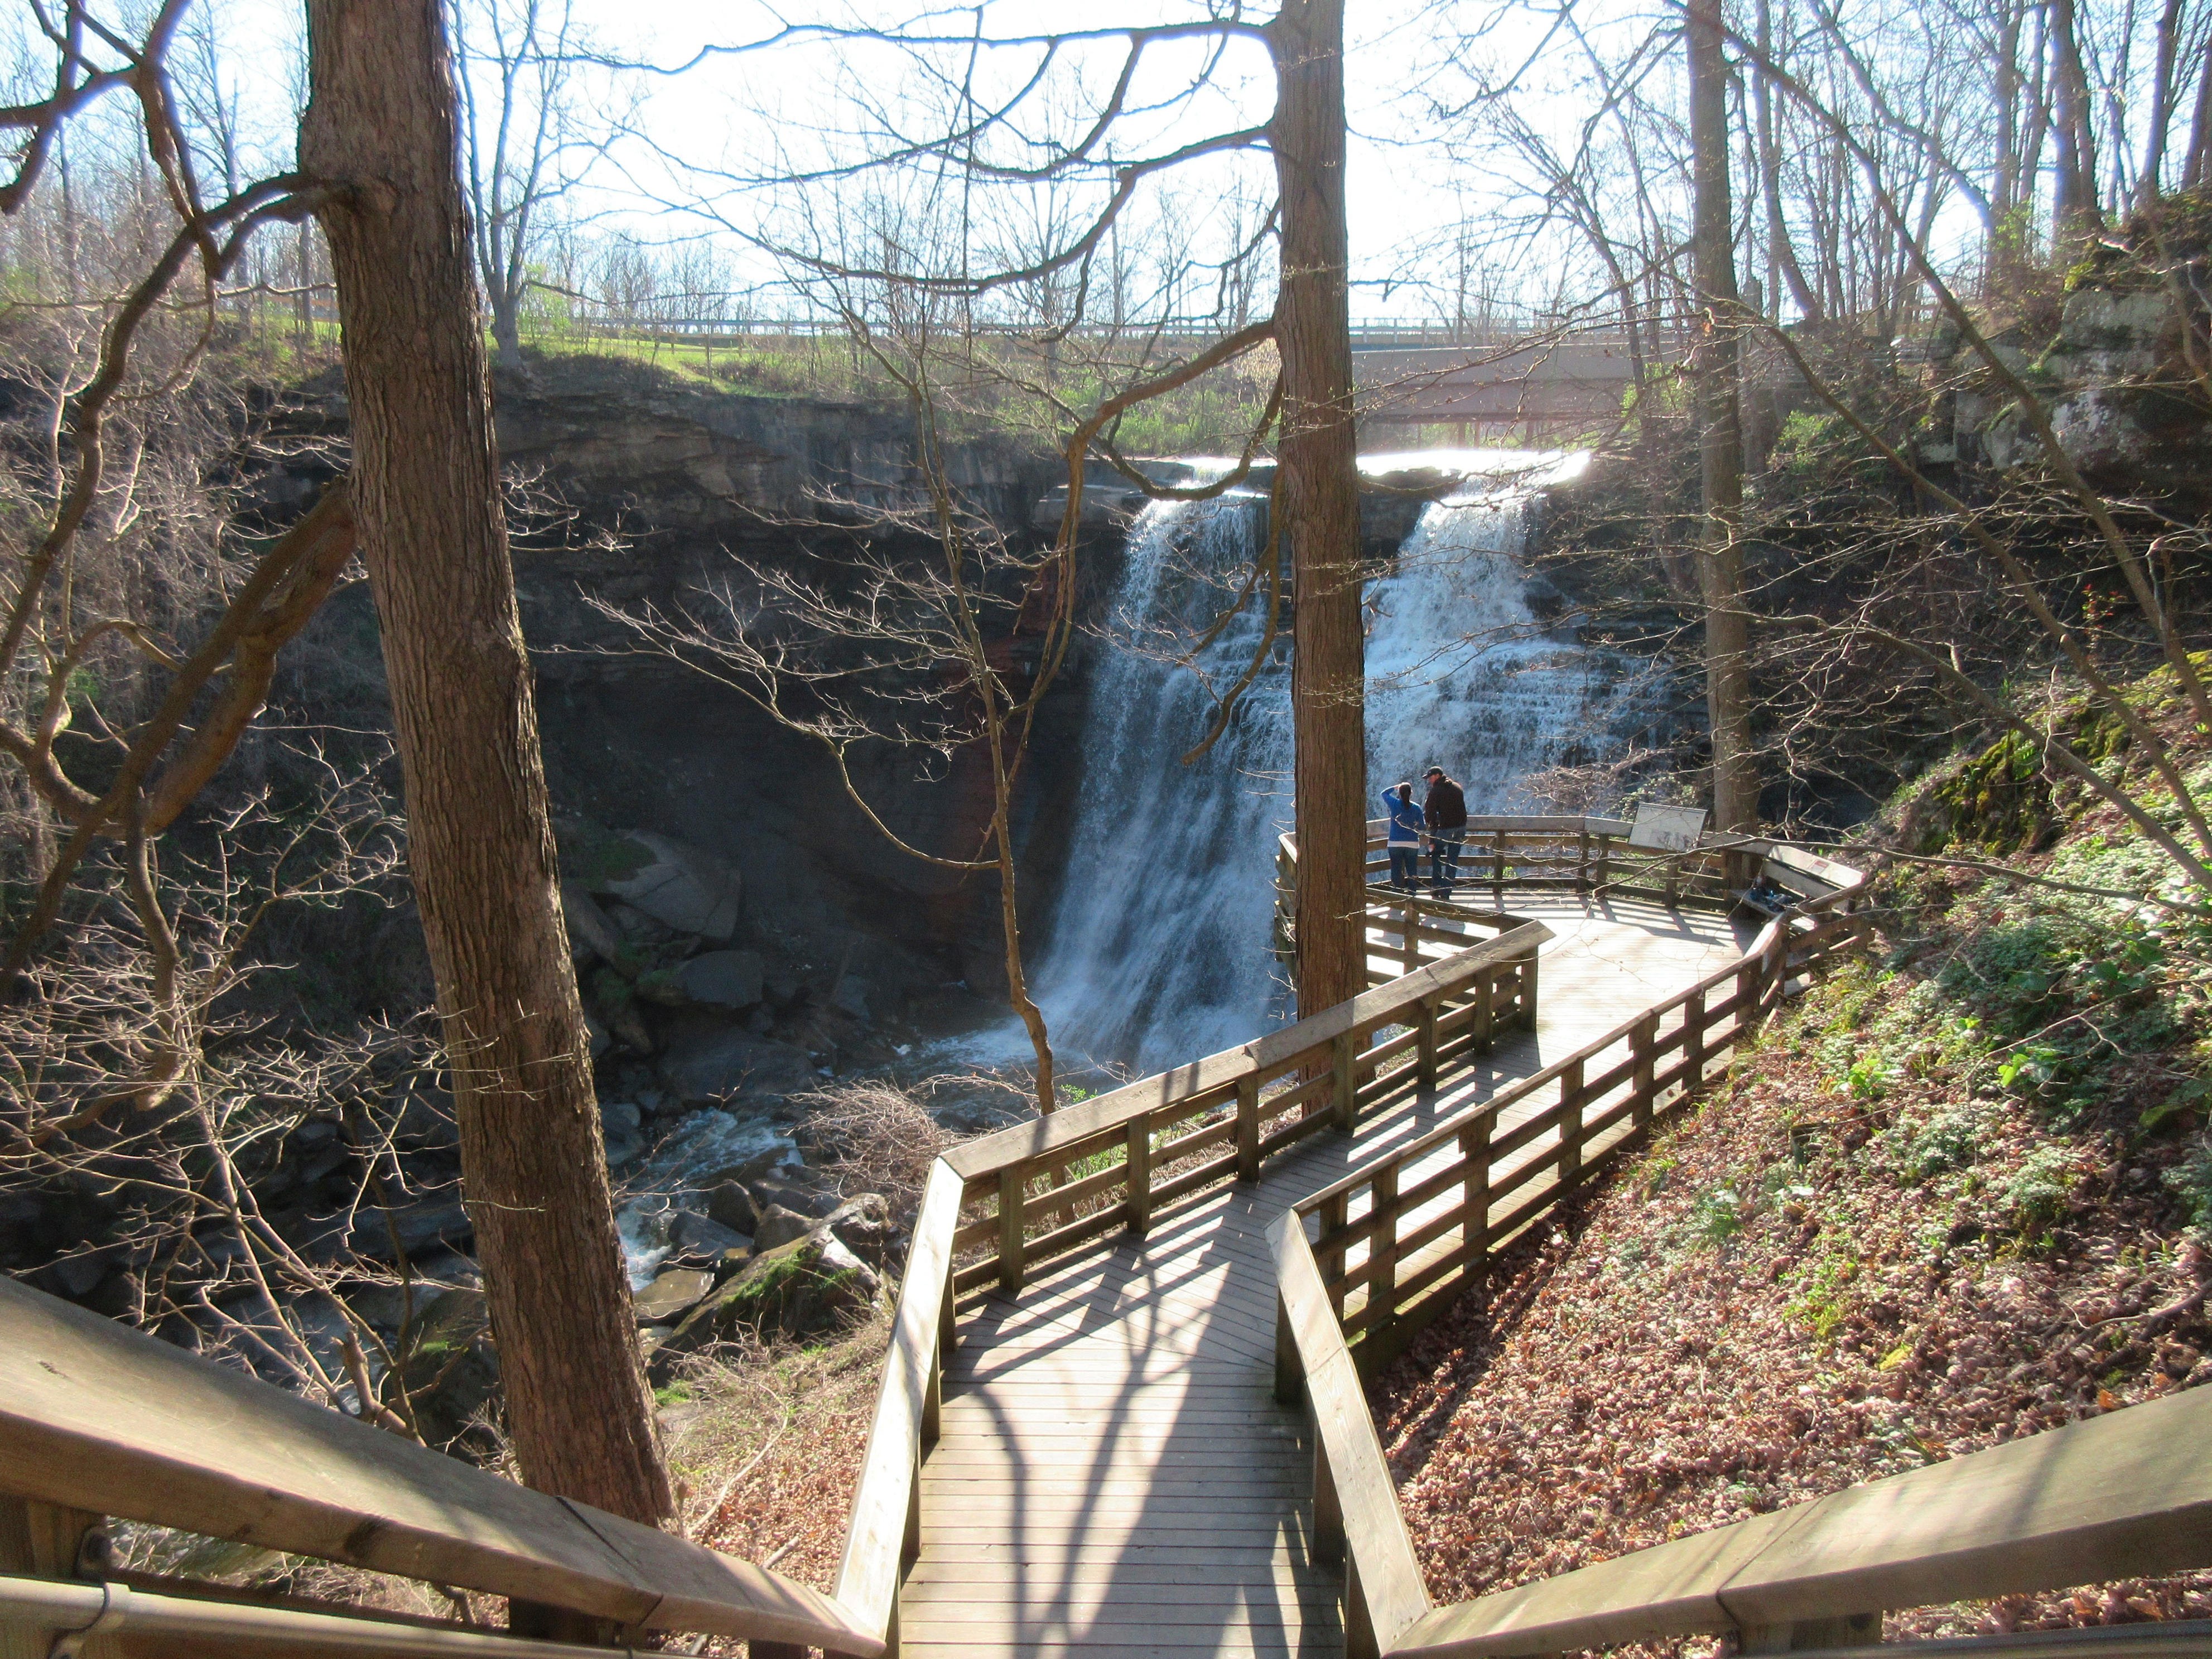 <p>The Stanford Trail is just one of the many available hiking spots in <a href="https://www.nps.gov/cuva/index.htm">Cuyahoga Valley National Park</a>. If you're wanting an extra challenge, the hike meets up with the <a href="https://www.alltrails.com/trail/us/ohio/brandywine-gorge-trail">Brandywine Gorge Trail</a> which offers you the option to extend your adventure.</p><p>If getting outside is a priority, but you're concerned about mobility or have young ones in tow, the park also offers the option of riding along the <a href="https://www.cvsr.org/">Cuyahoga Valley Scenic Railroad</a>.</p>